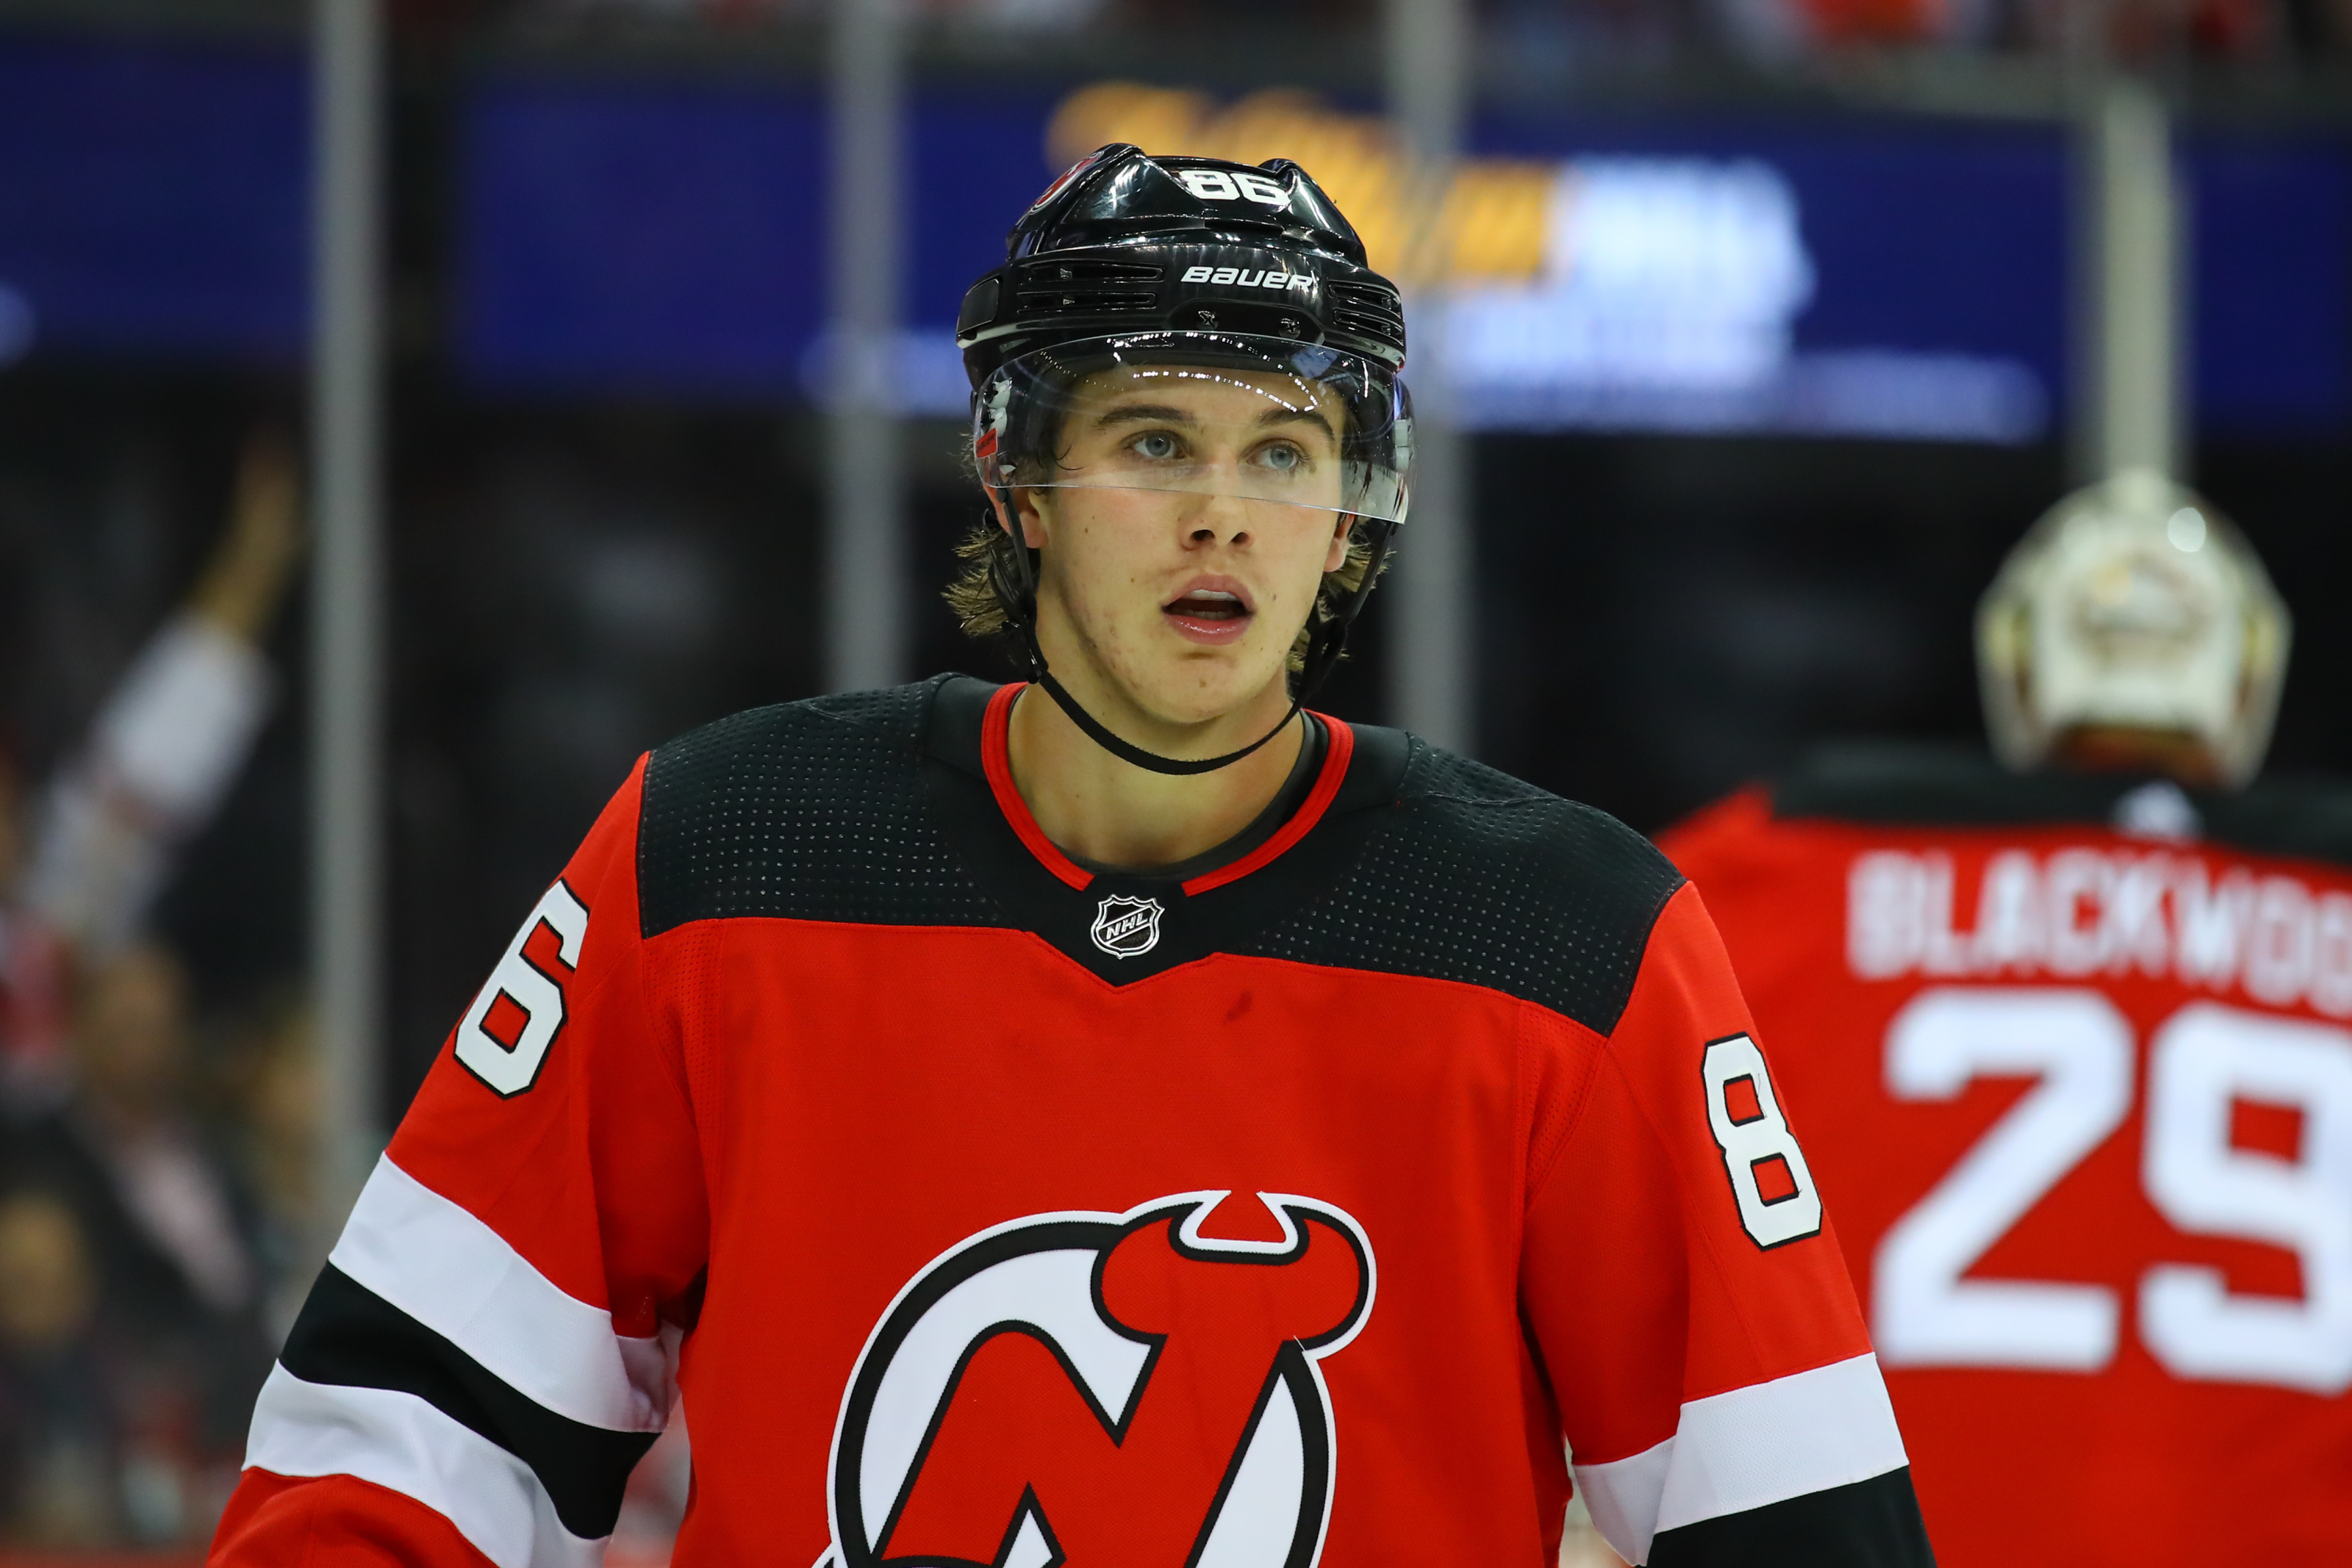 Jack Hughes is putting it all together and carrying the Devils